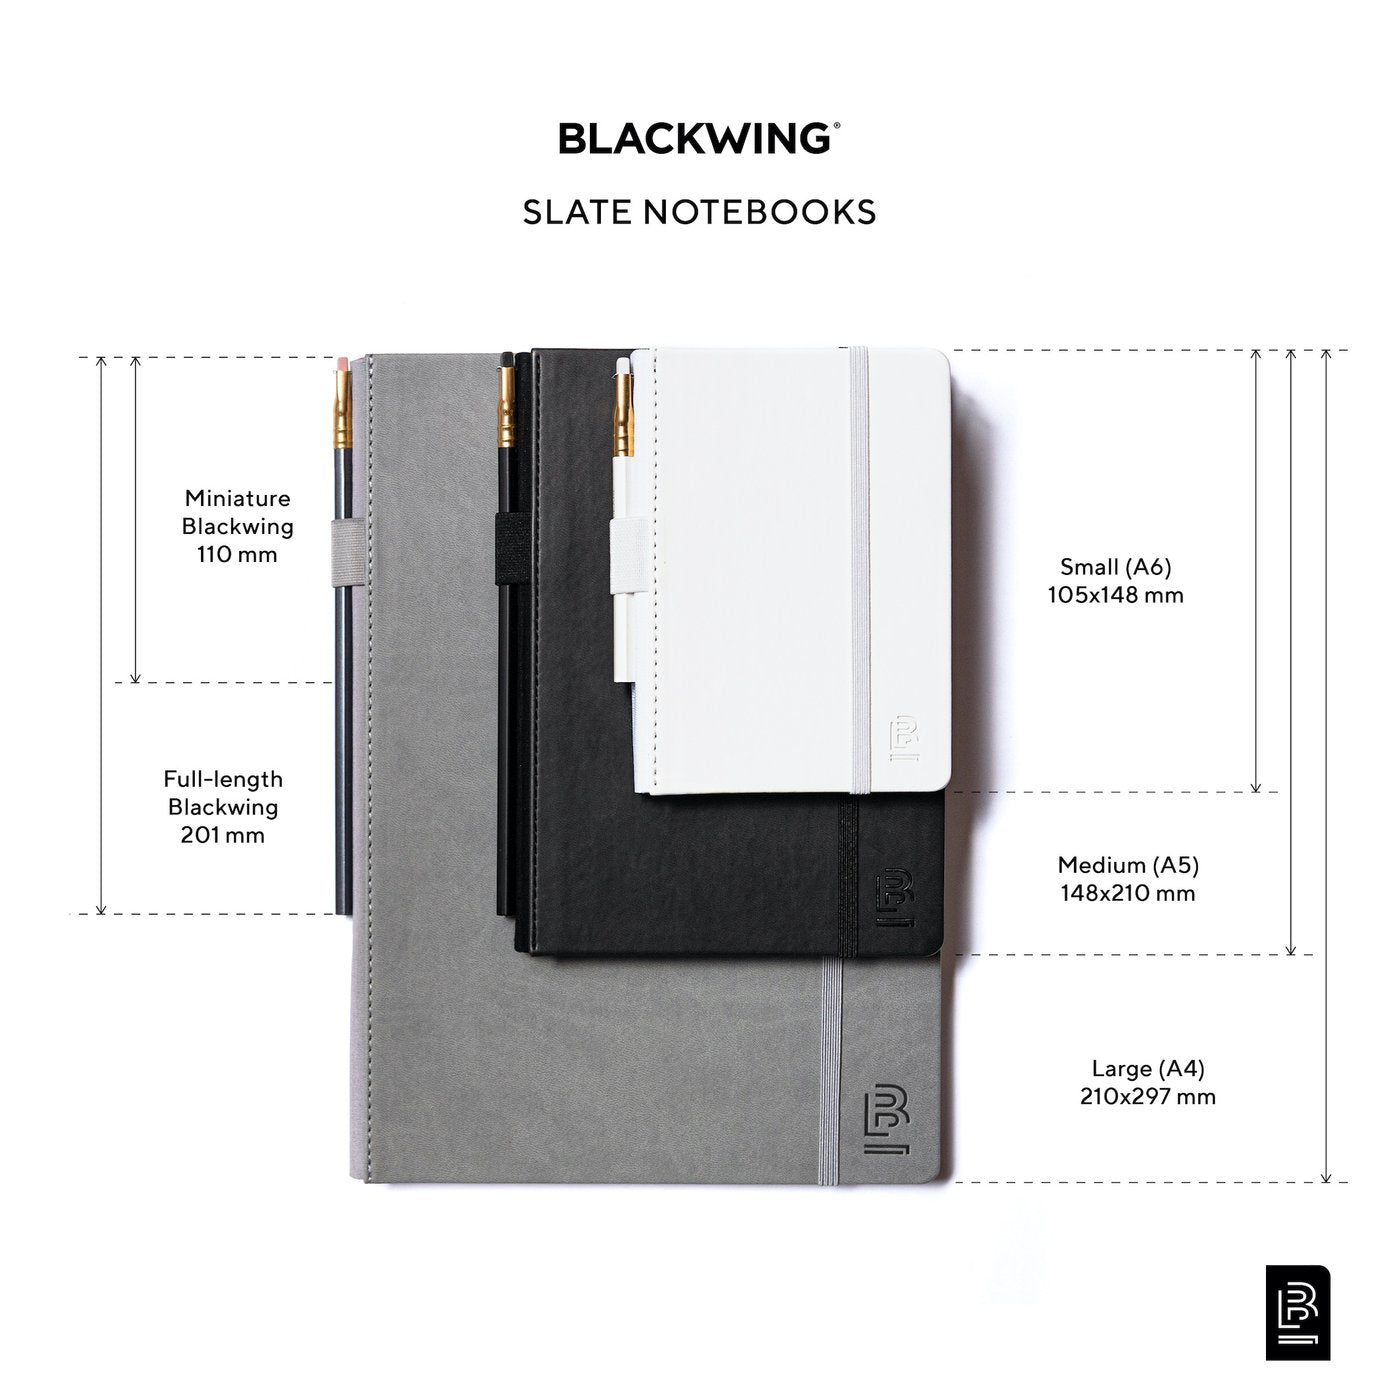 Blackwing Small (A6) Slate Notebook- White